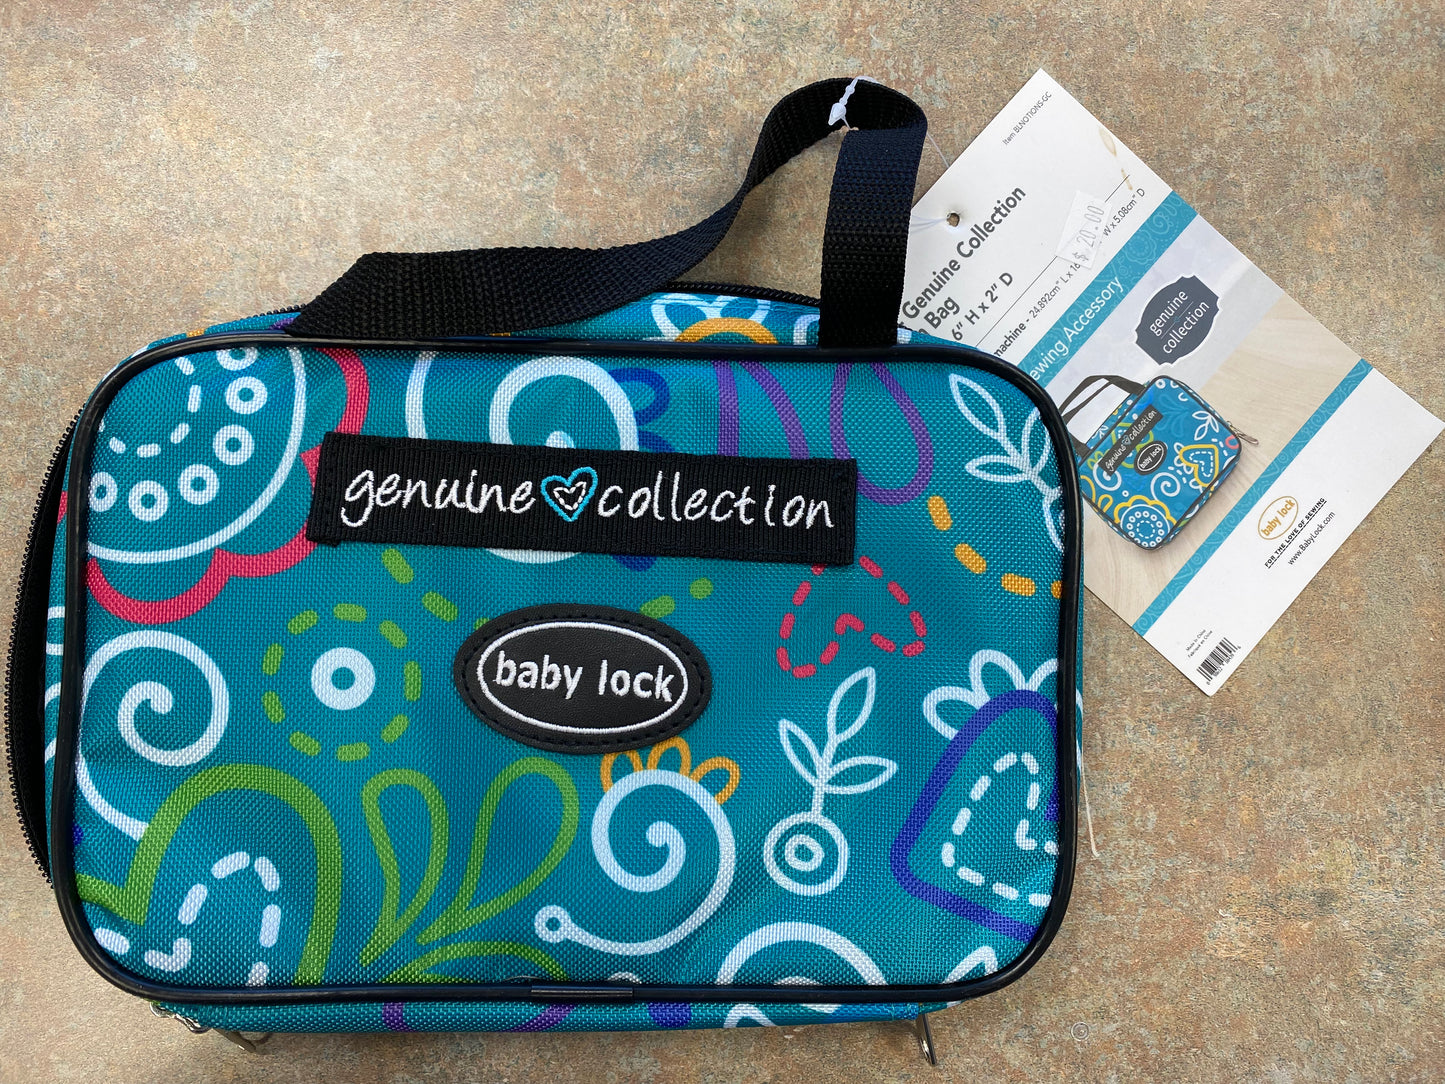 Baby Lock- Genuine Collection Notion Bag